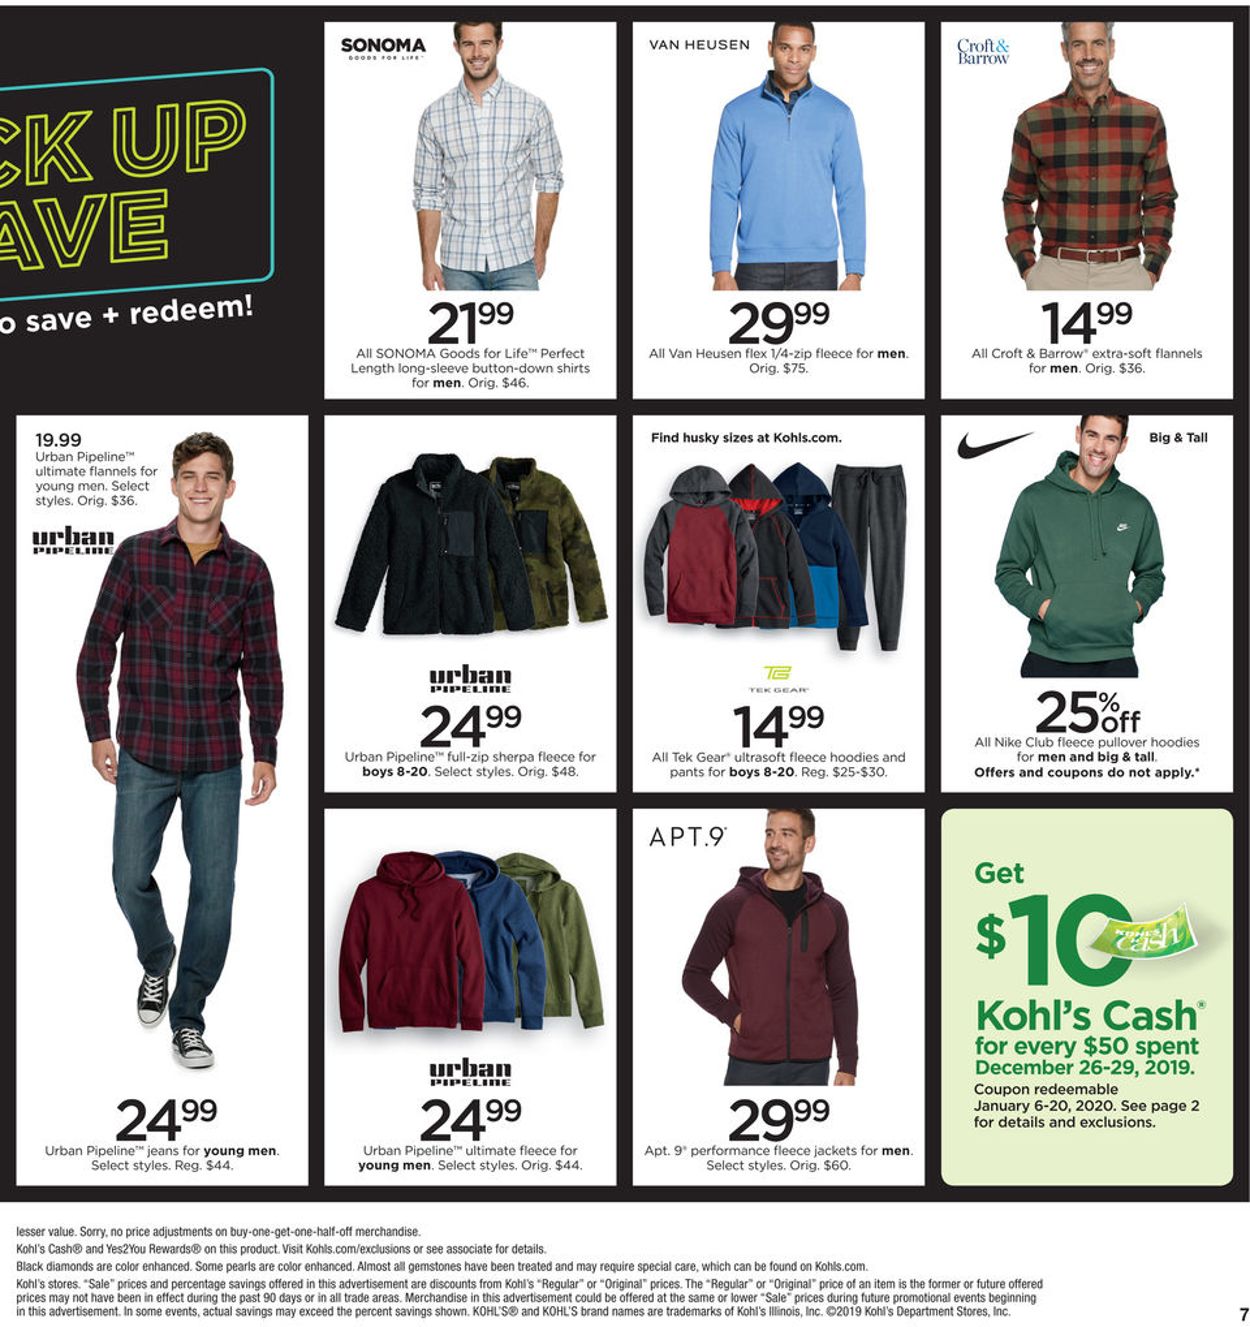 Kohl's Current weekly ad 12/26 - 12/31/2019 [7] - frequent-ads.com